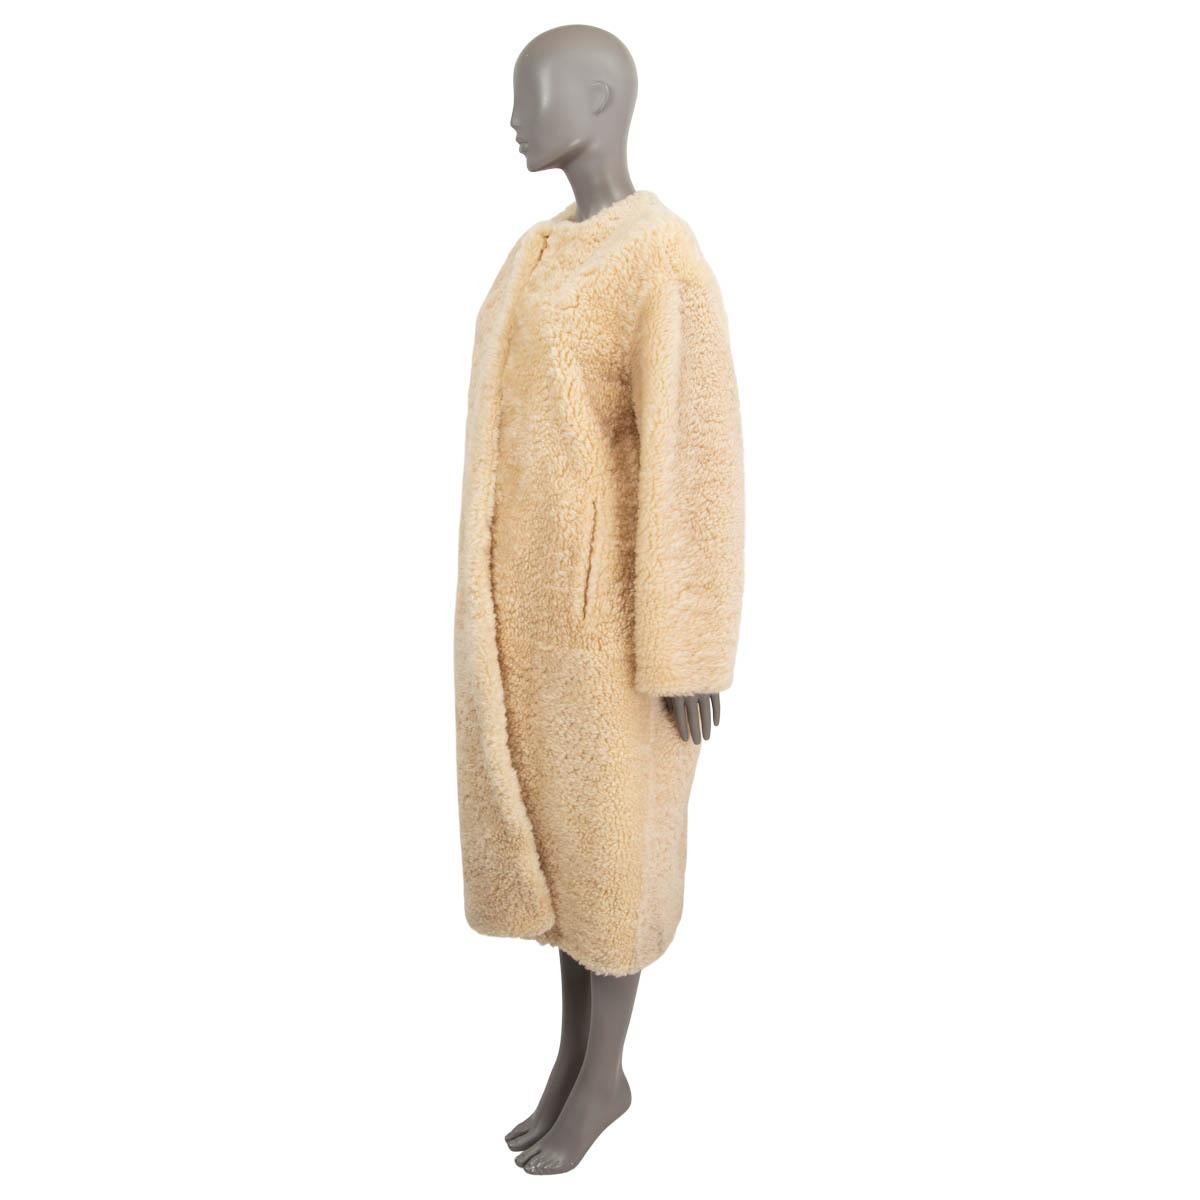 100% authentic Chloé collarless cocoon coat in butterceam (beige) shearling. Features a round neck and side slit pockets. Closes with concealed hooks. Lined in silk (100%). Has been worn and is in excellent condition.

2021 Fall/Winter by Gabriela